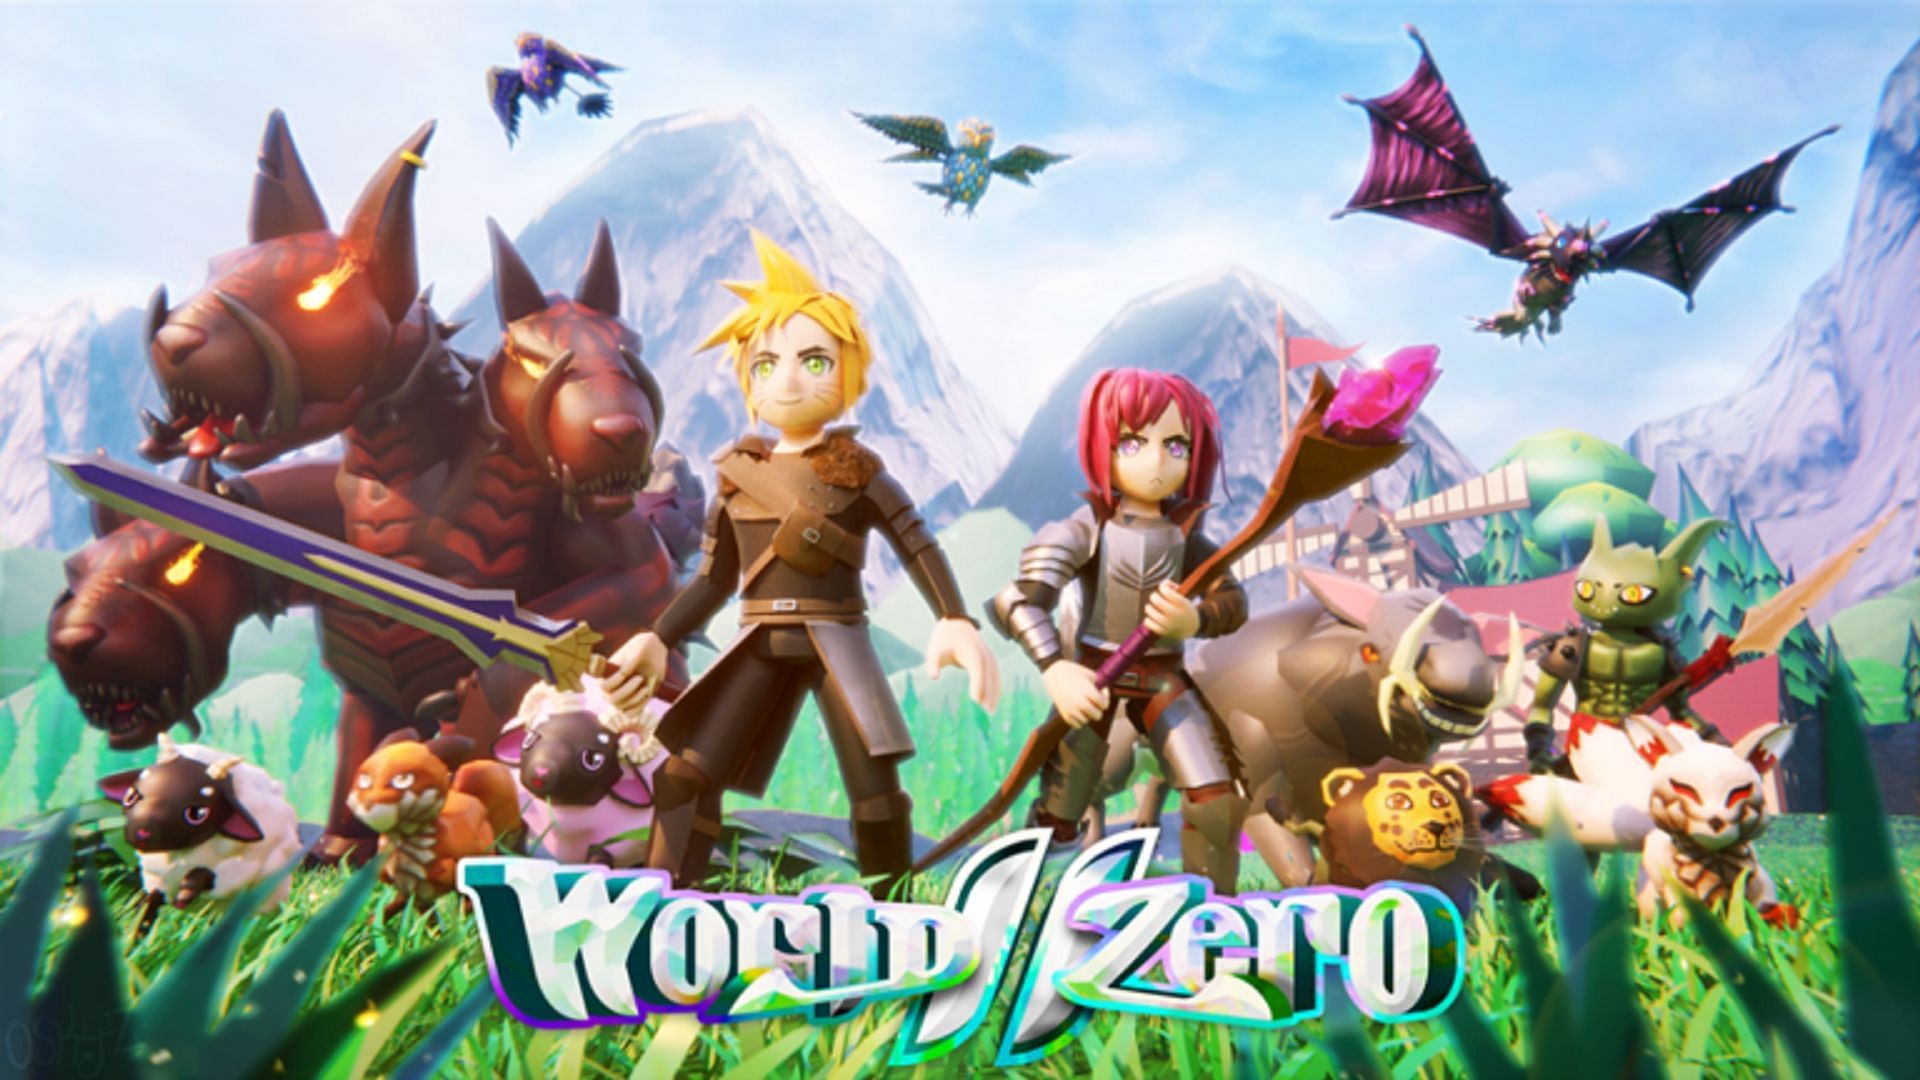 World Zero, a Roblox every player should try (Image via Roblox)